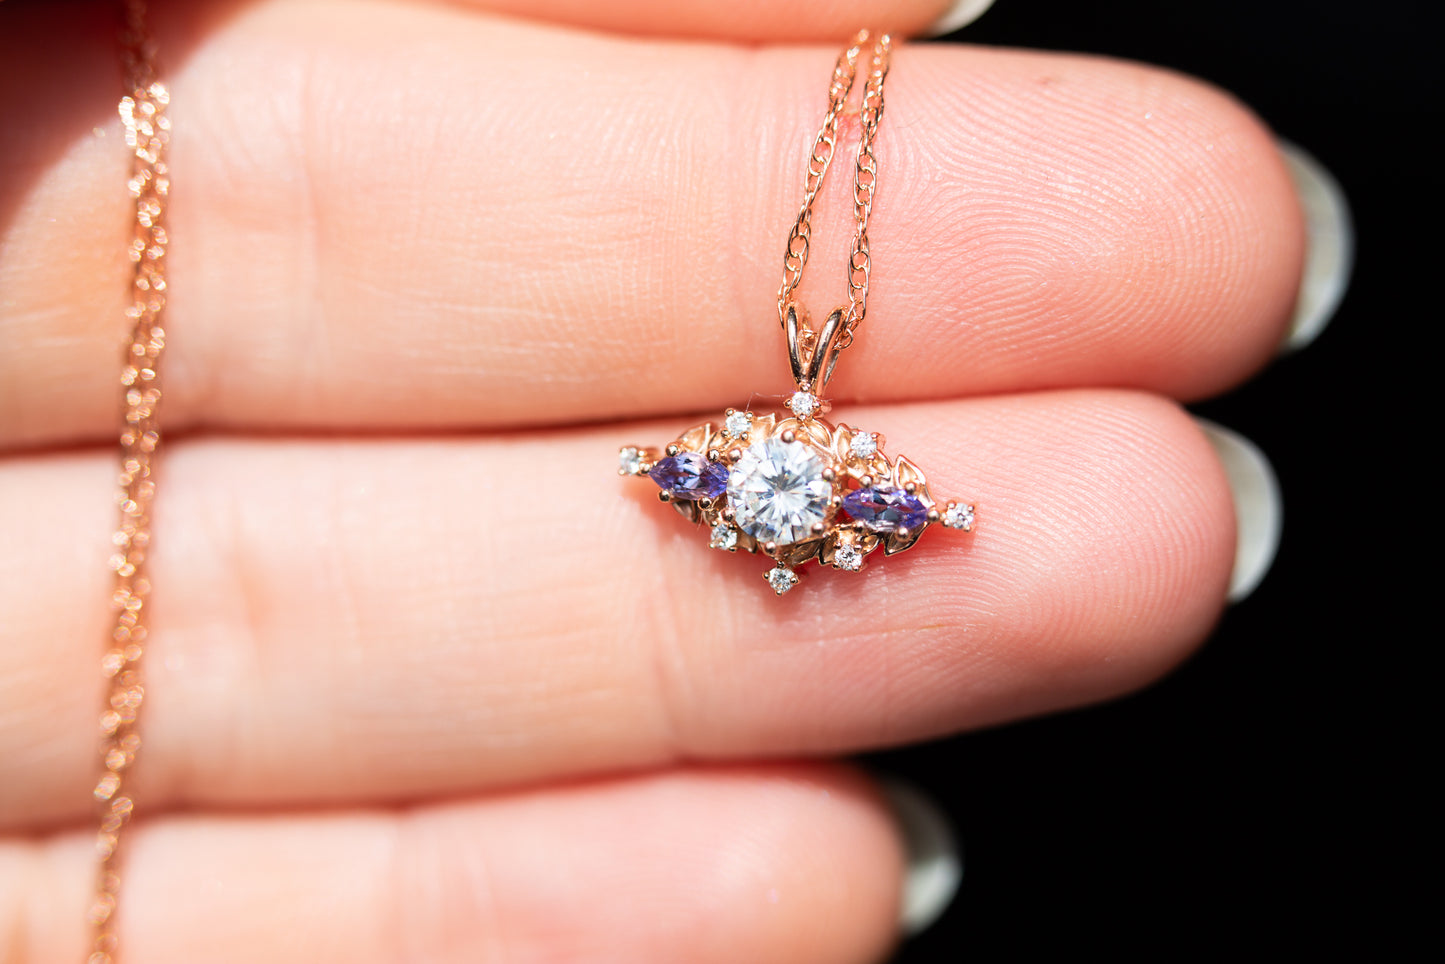 Load image into Gallery viewer, Briar rose three stone necklace with moissanite/tanzanite
